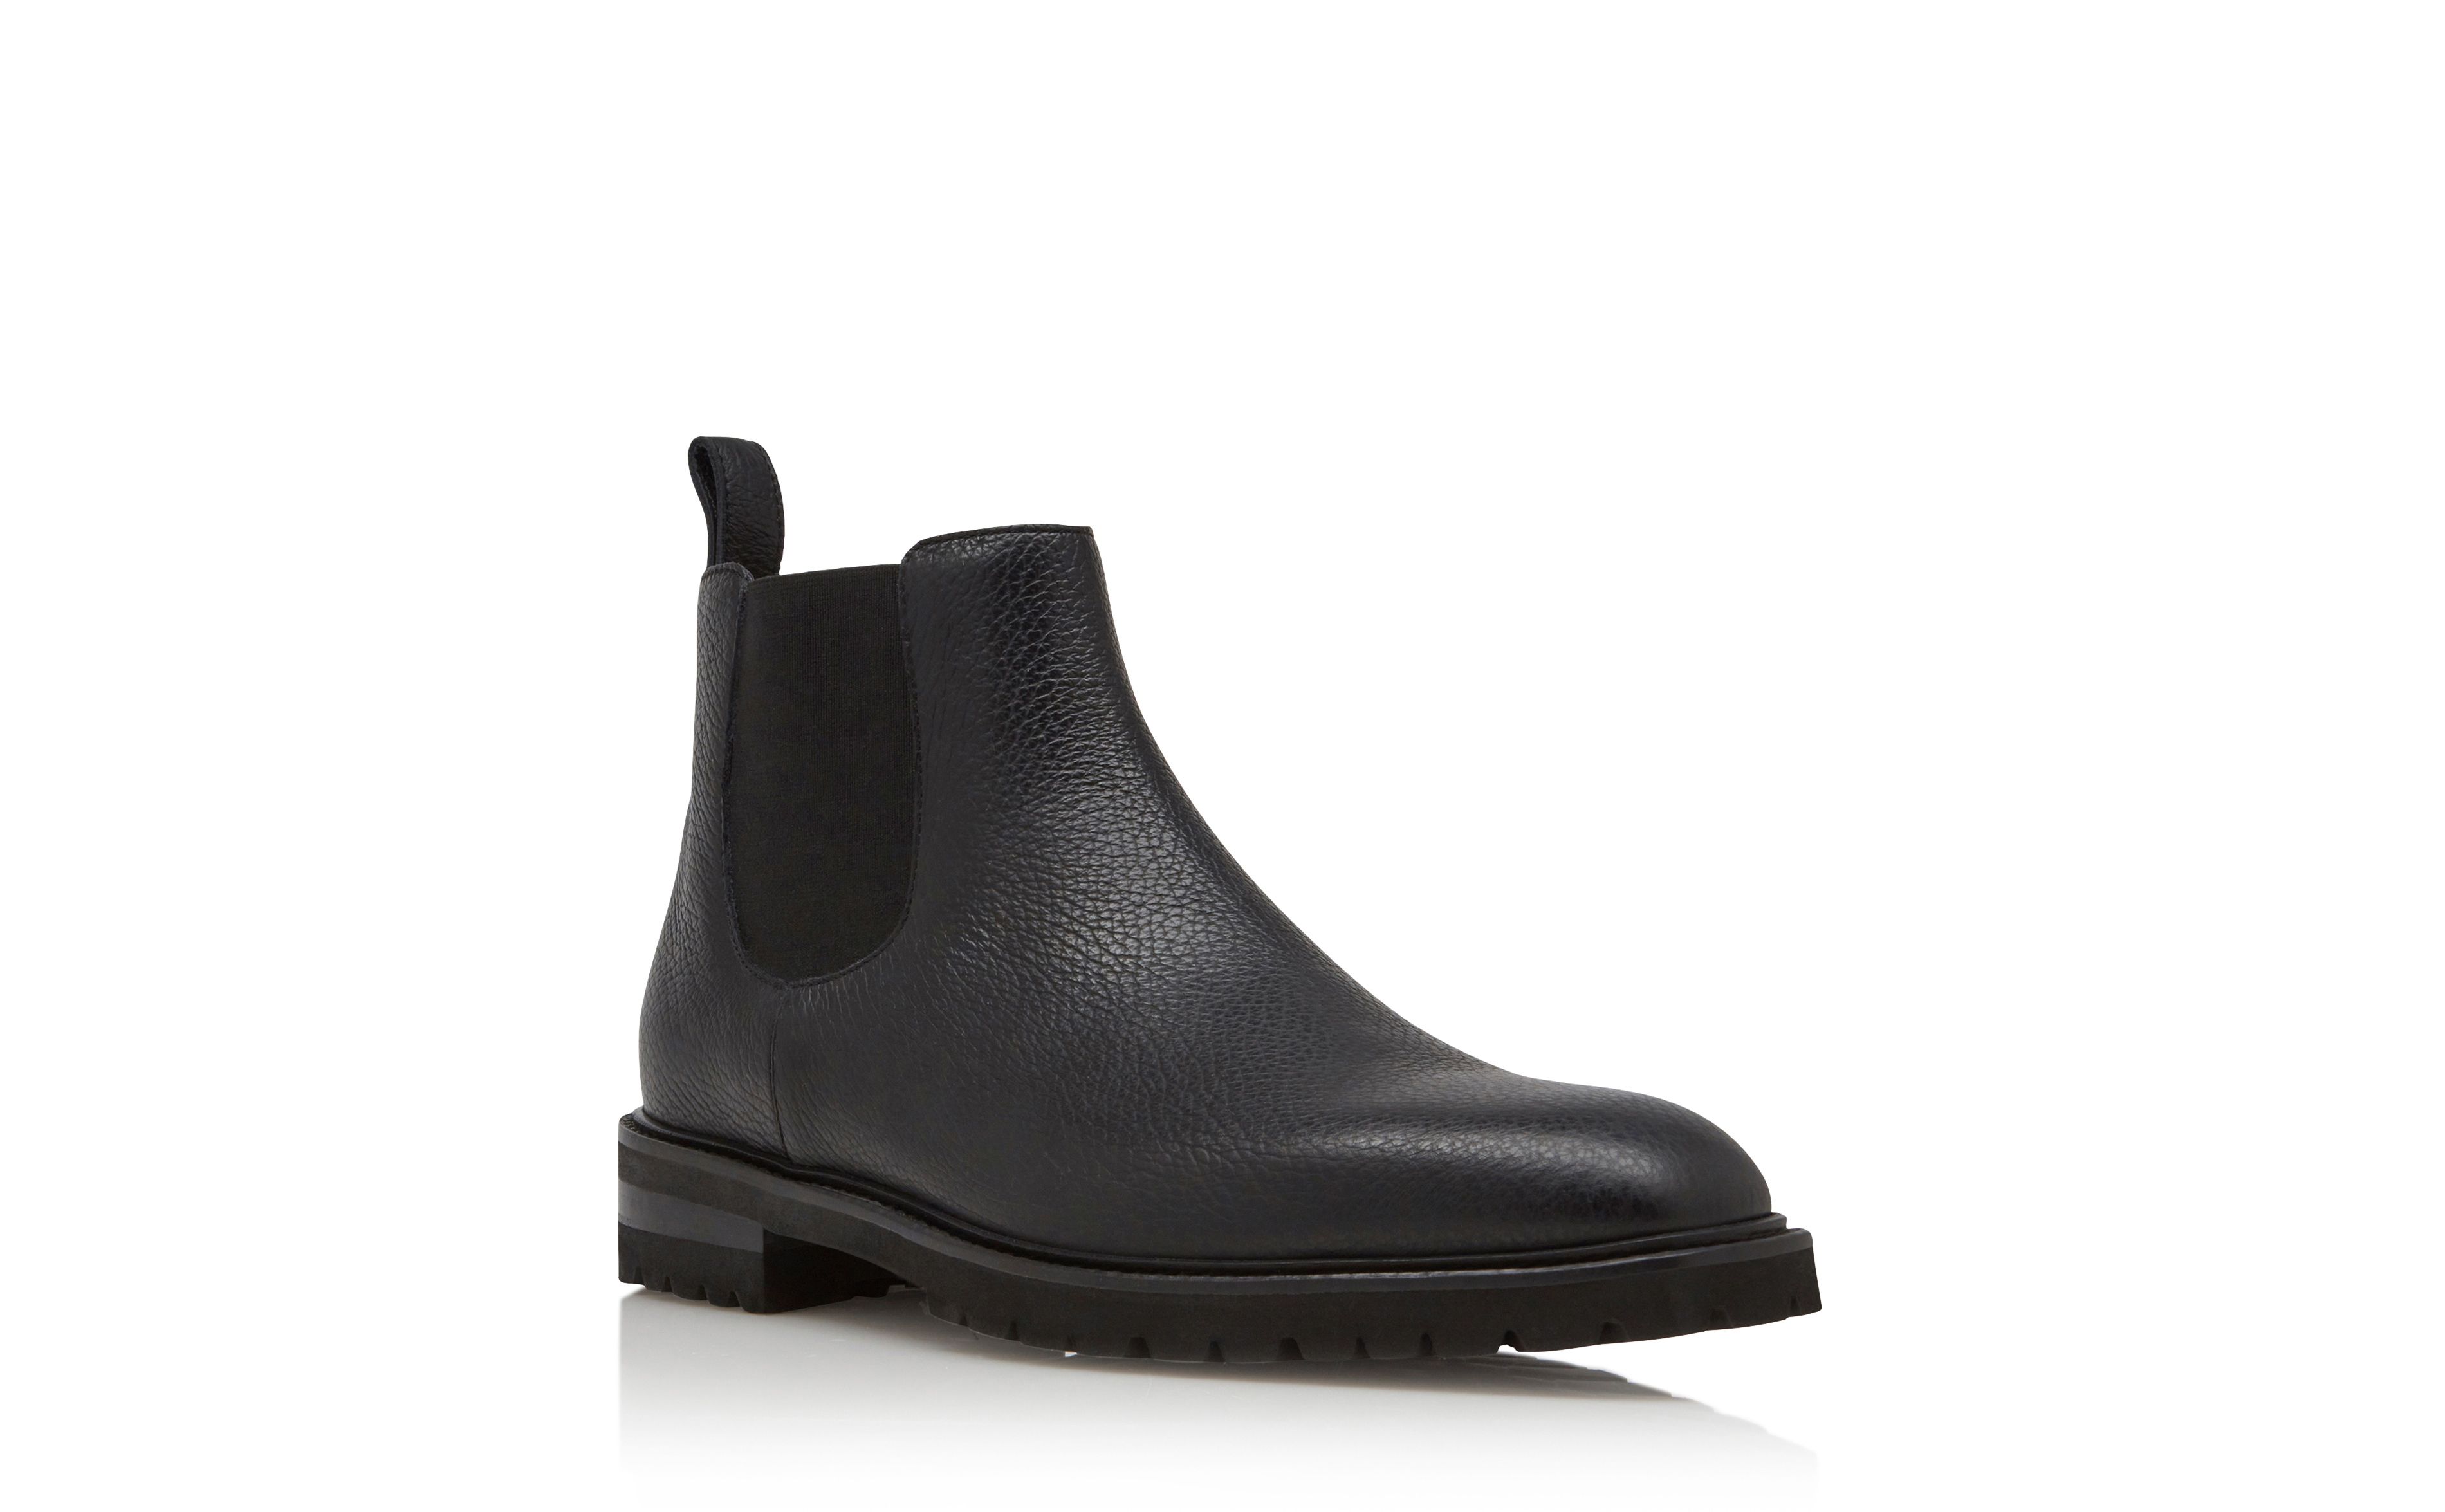 Designer Black Calf Leather Ankle Boots - Image Upsell